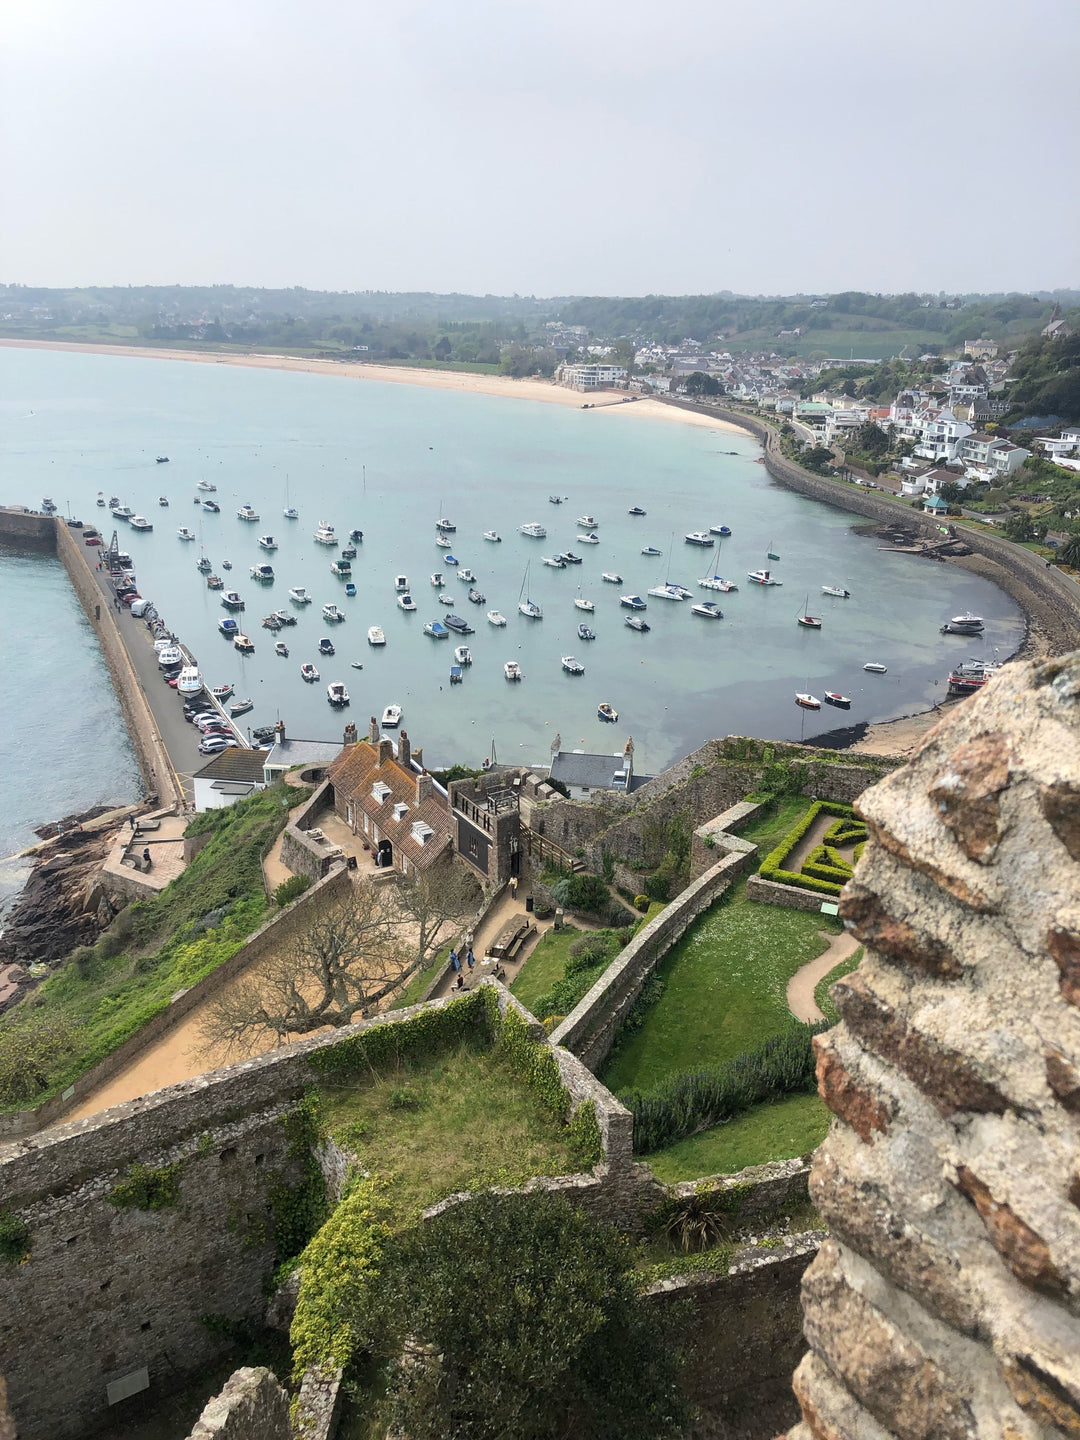 First 5 favourite things to do when visiting Jersey!